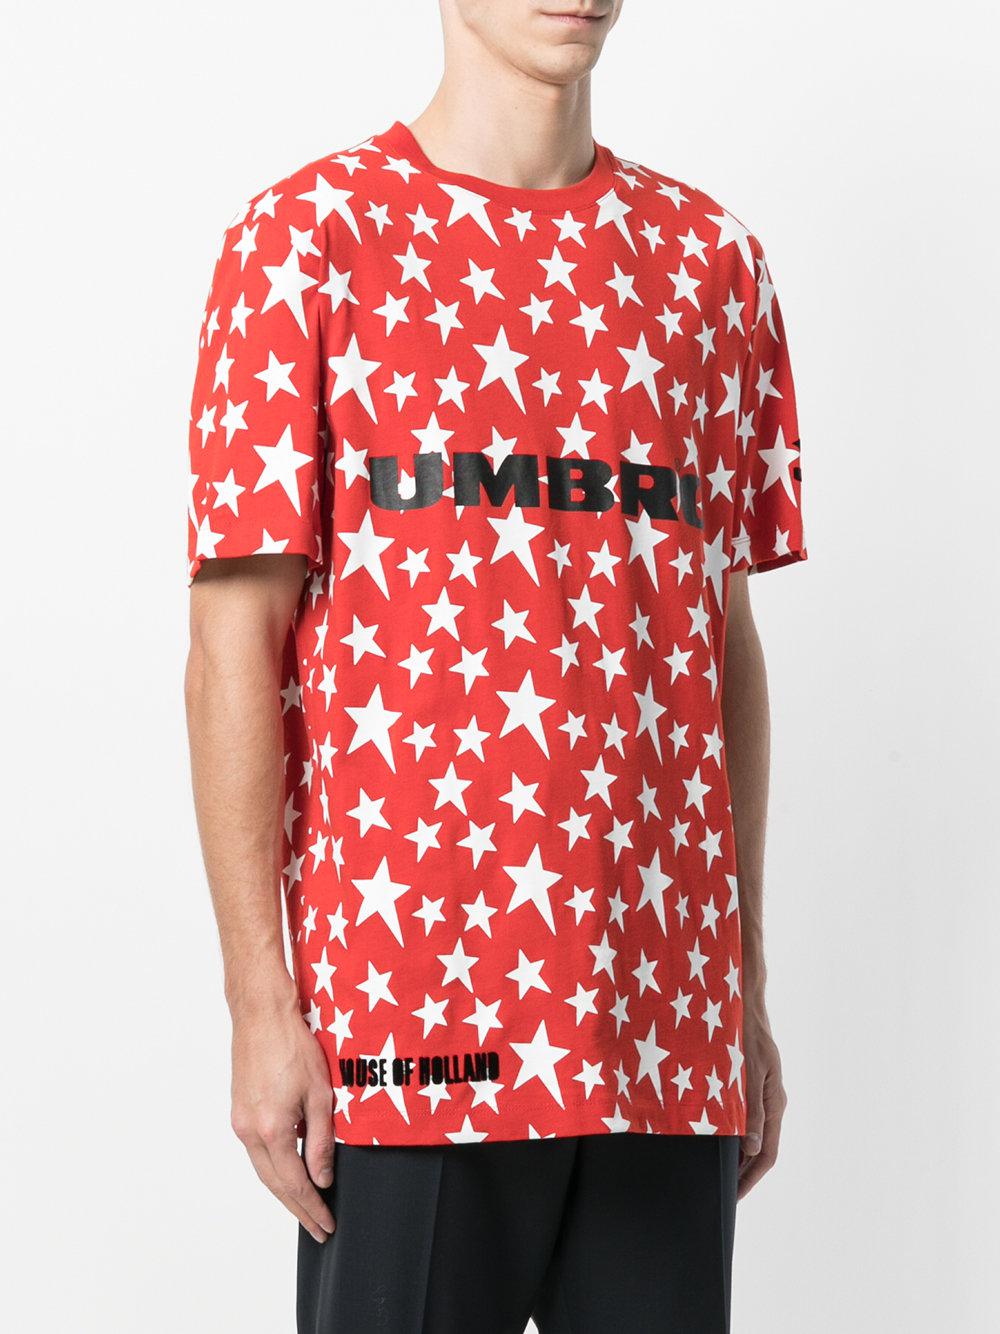 Lyst - House Of Holland Star Print Slogan T-shirt in Red